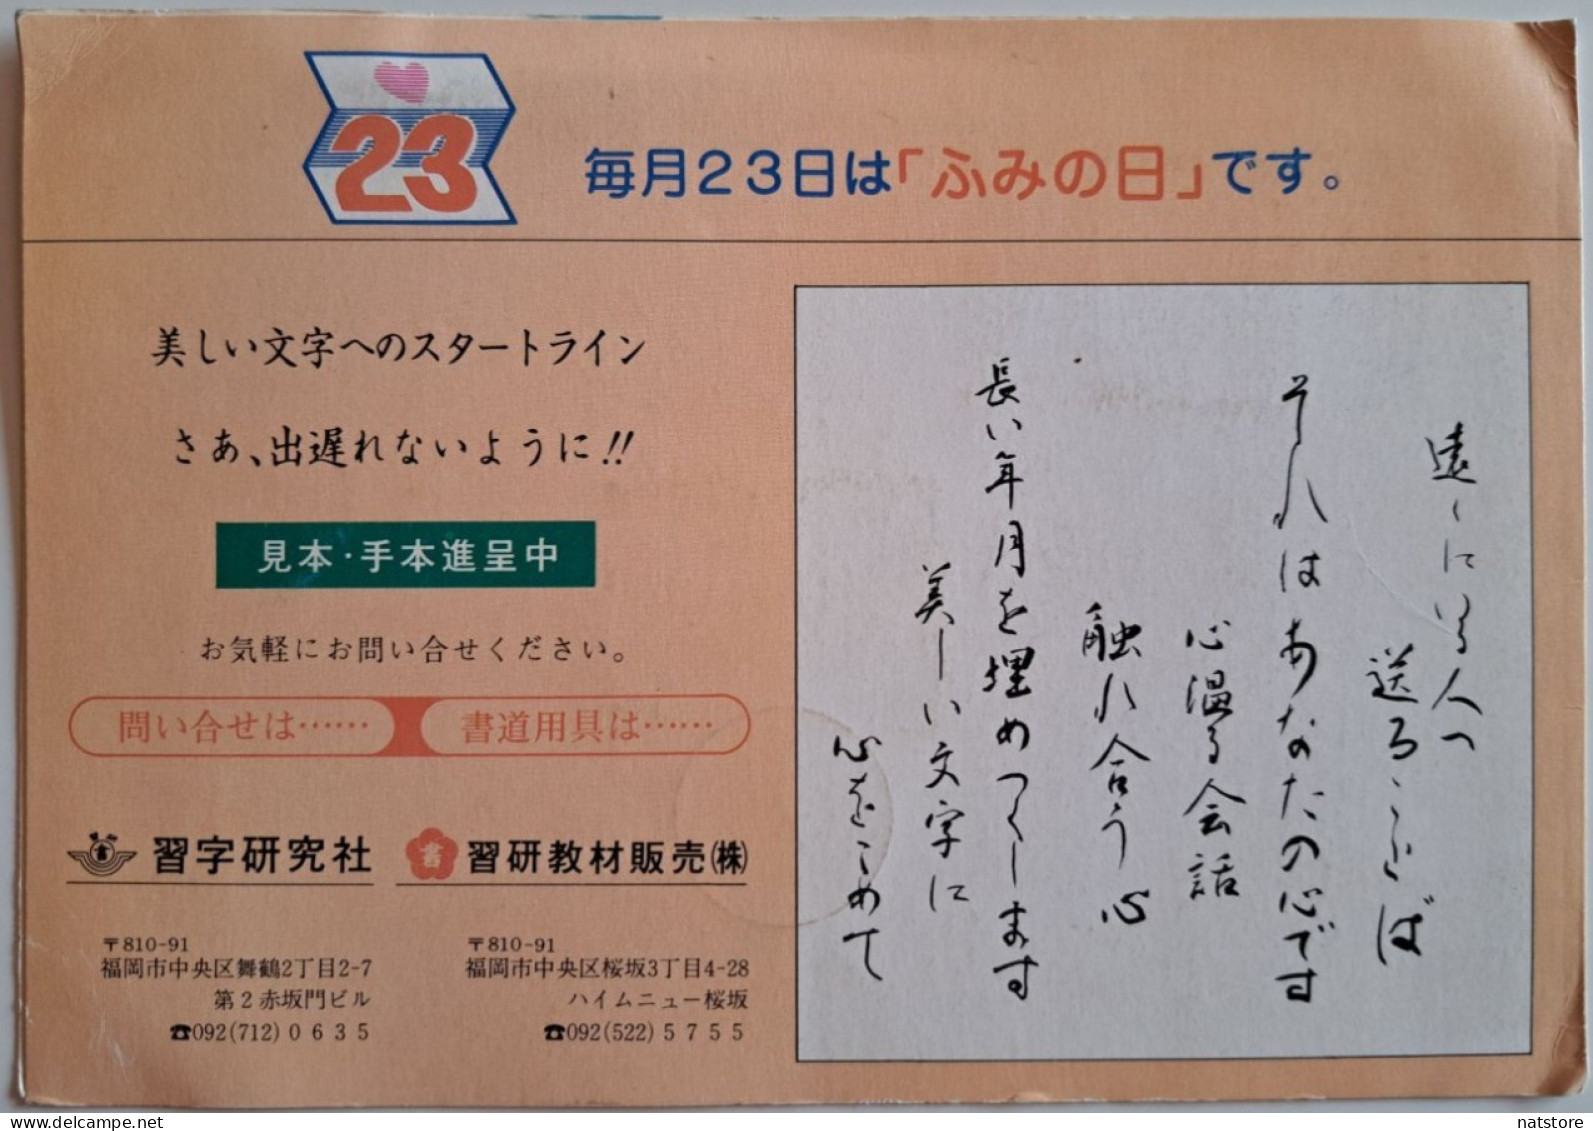 1982..JAPAN..BOOKLET WITH STAMPS+SPECIALCANCELLATION..FUKUOKA'82. GREAT EXHIBITION..Japanese Songs - Cartas & Documentos